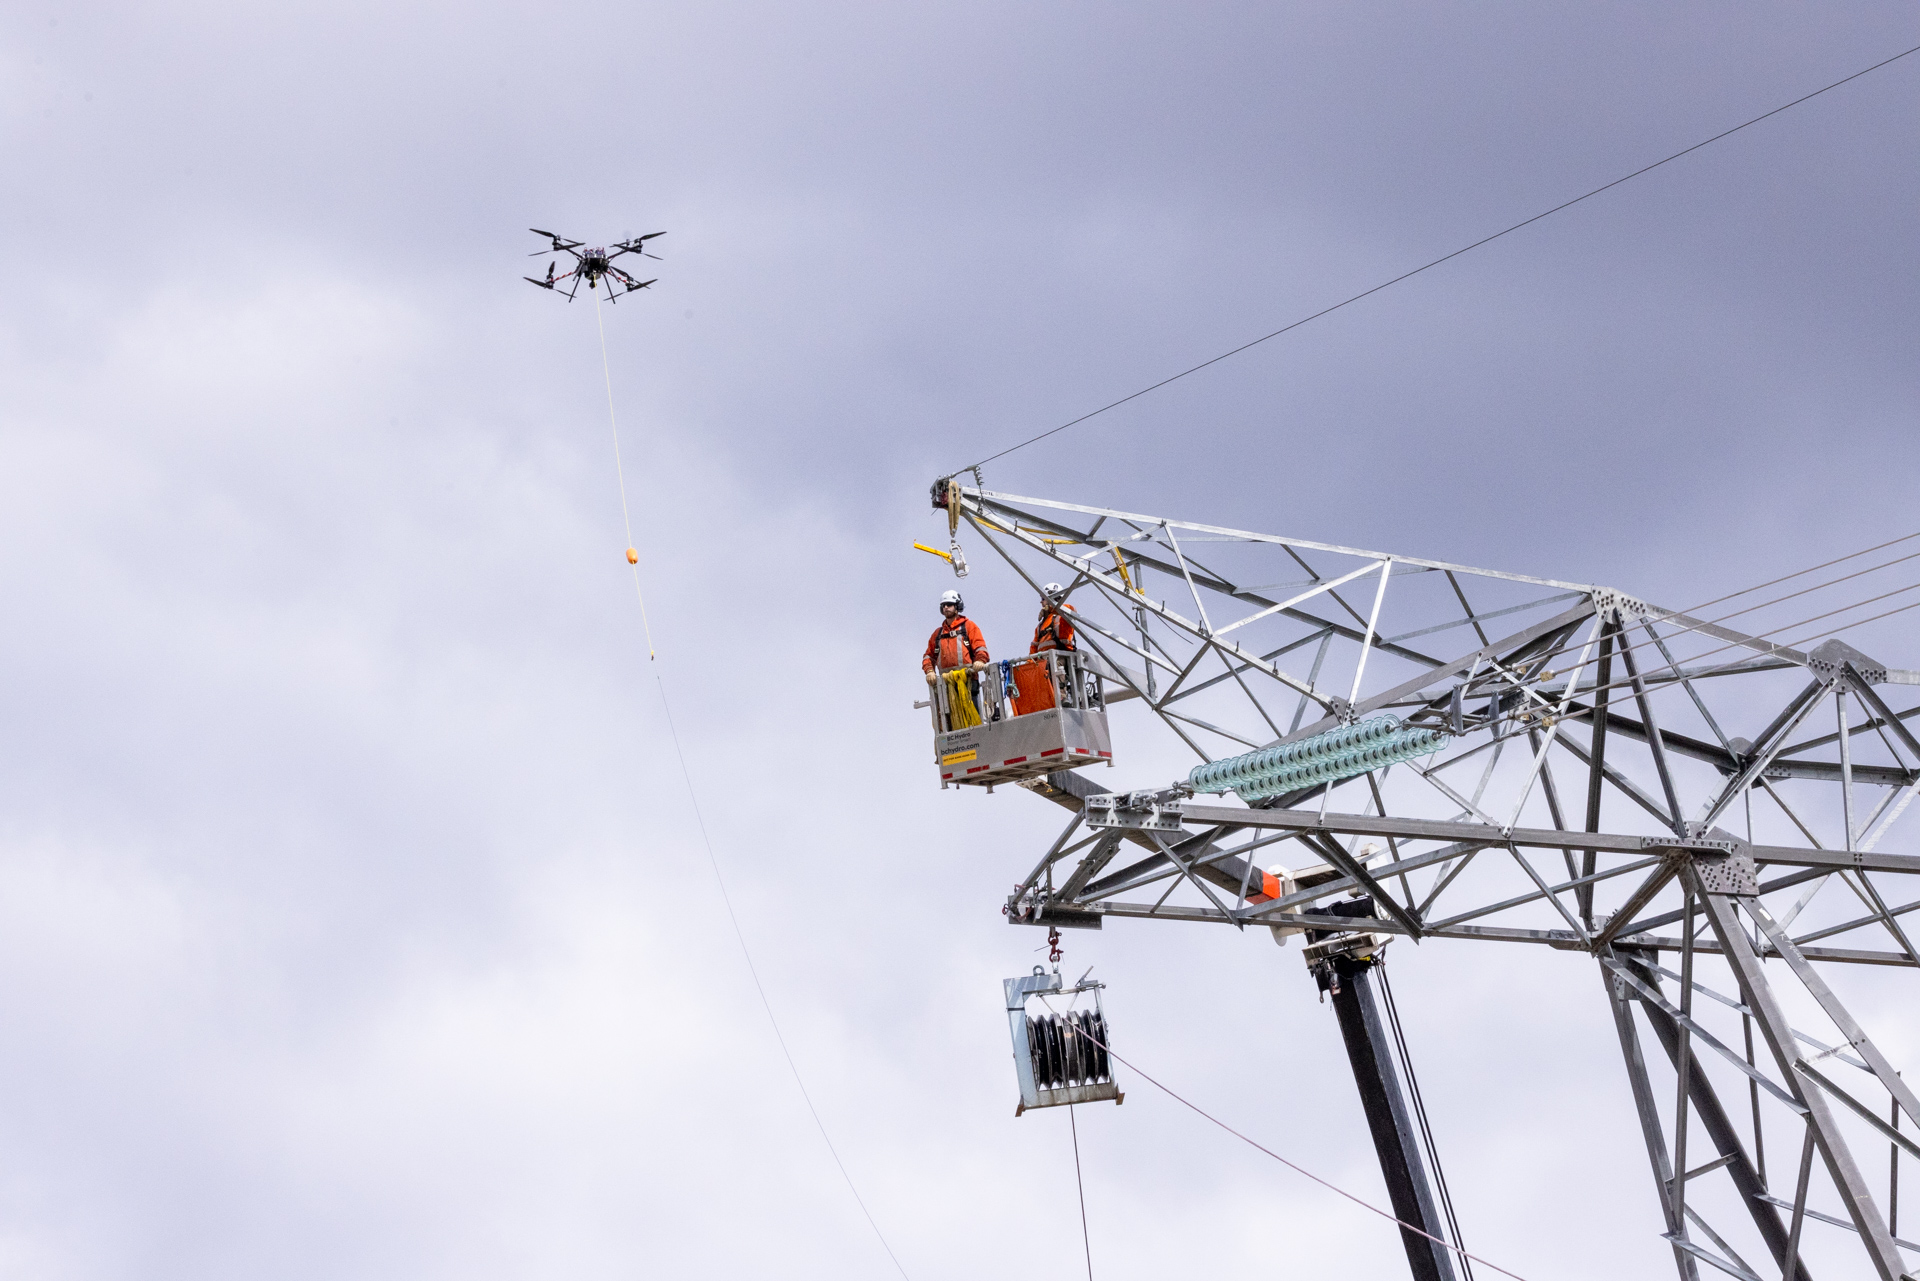 A drone is used to string the transmission lines from the substation to the powerhouse.